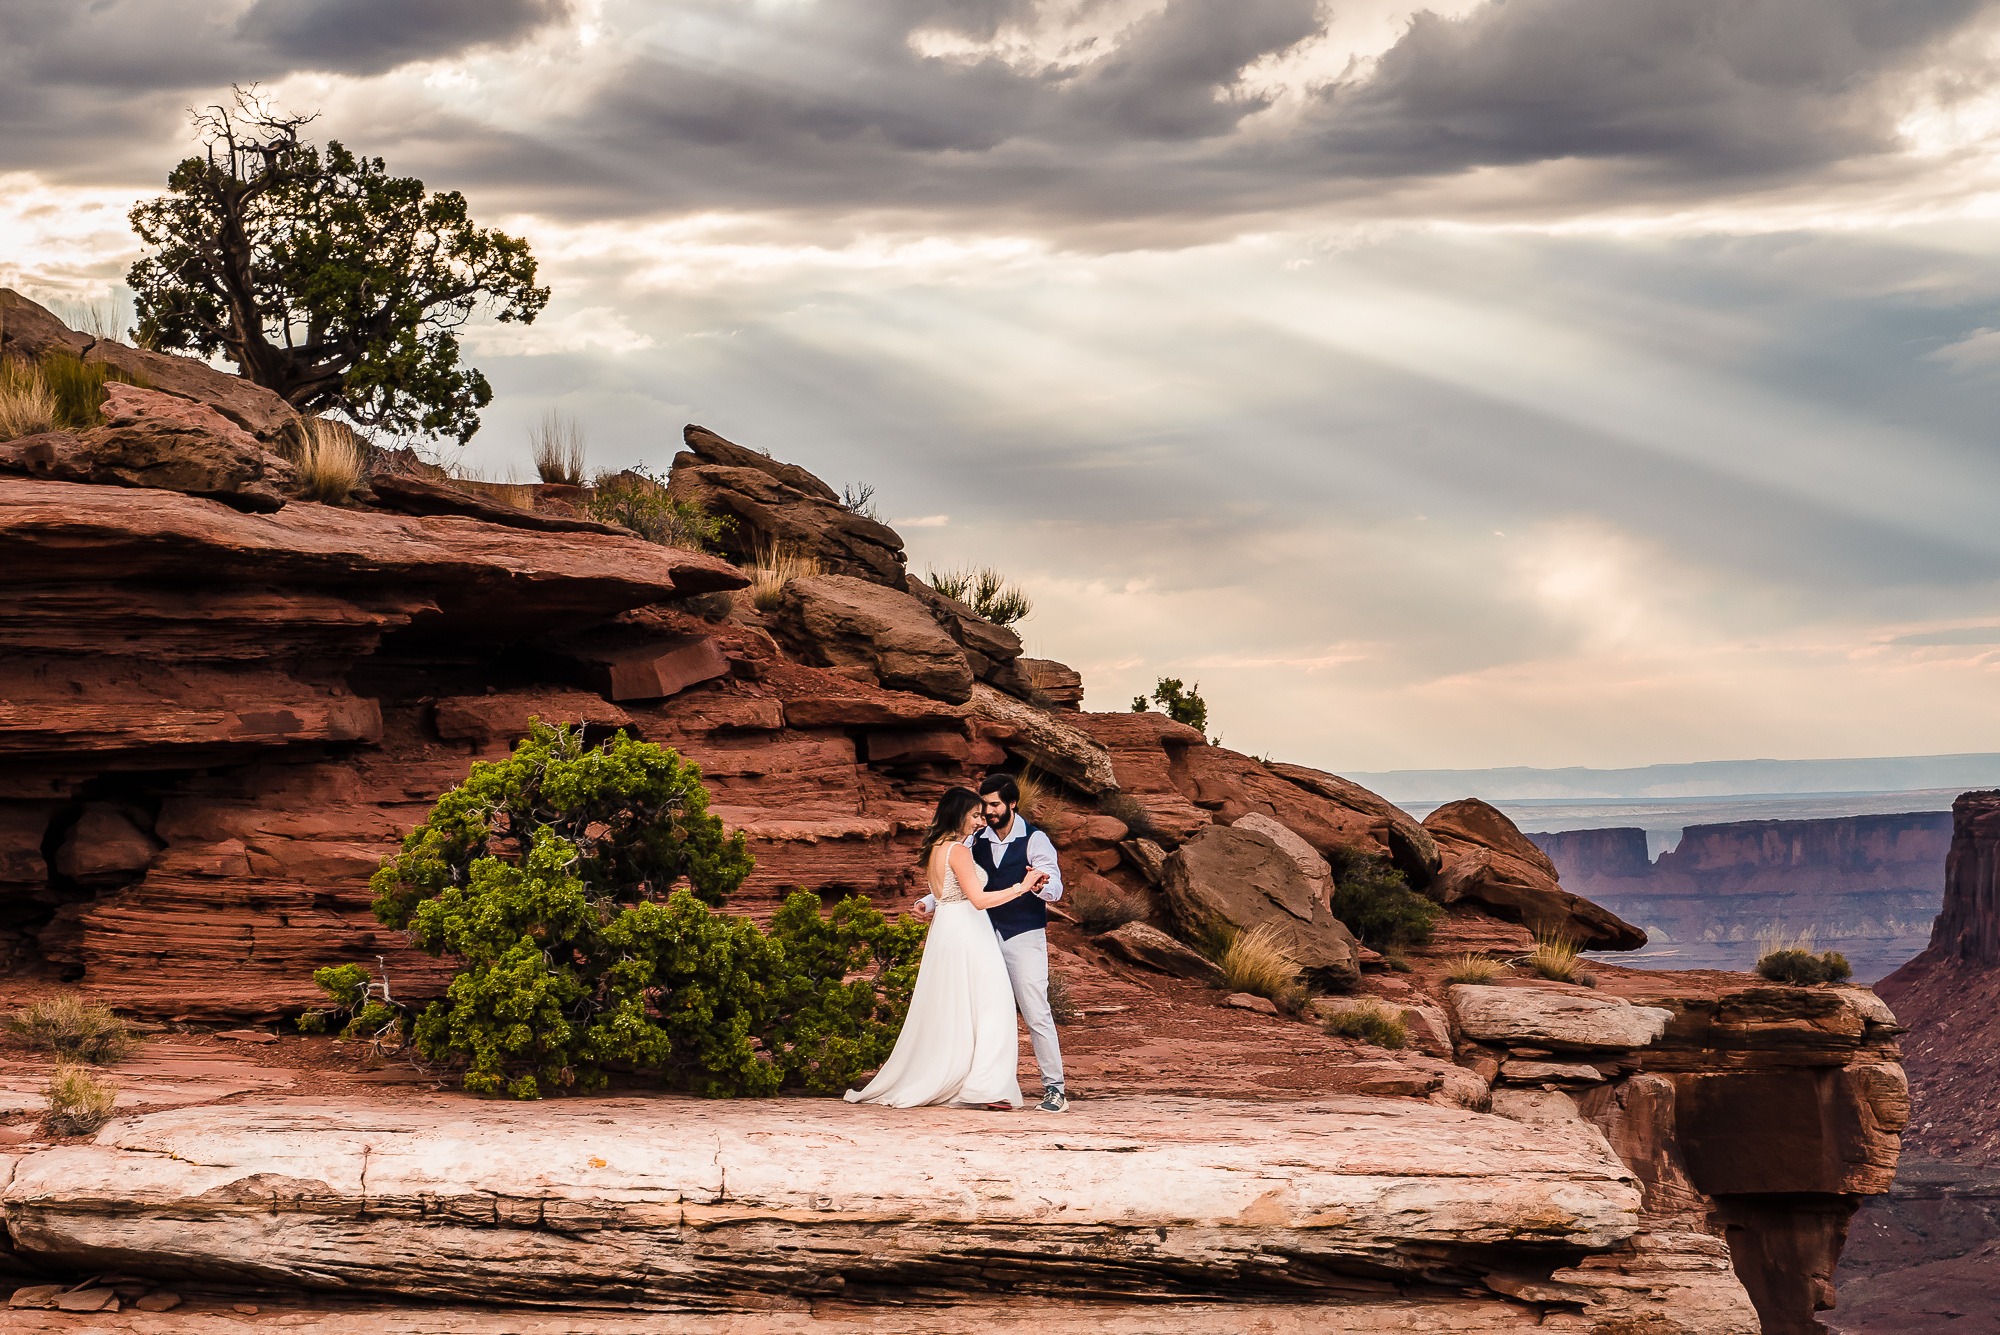 To celebrate their Moab elopement, this couple share a first dance on a dramatic overlook, with moody, cloudy skies above and rays of sunshine pouring down on them.